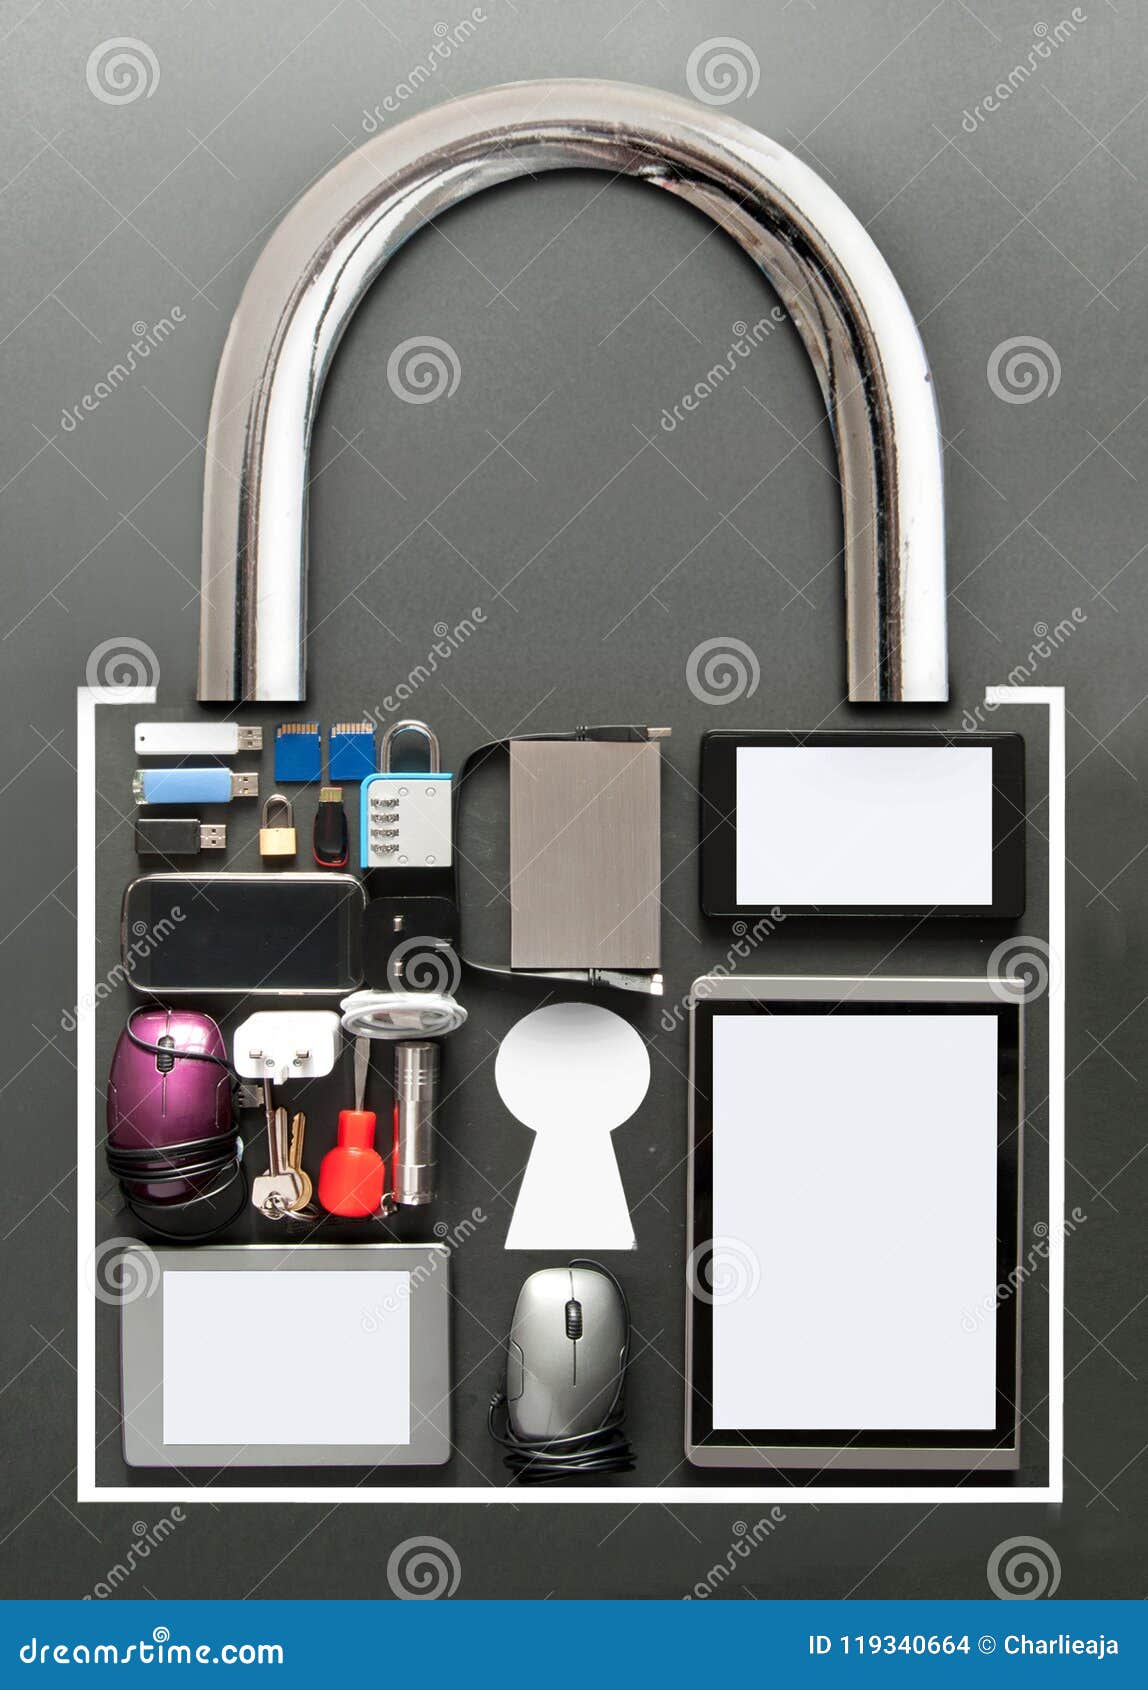 vrious-devices-stock-photos-free-royalty-free-stock-photos-from